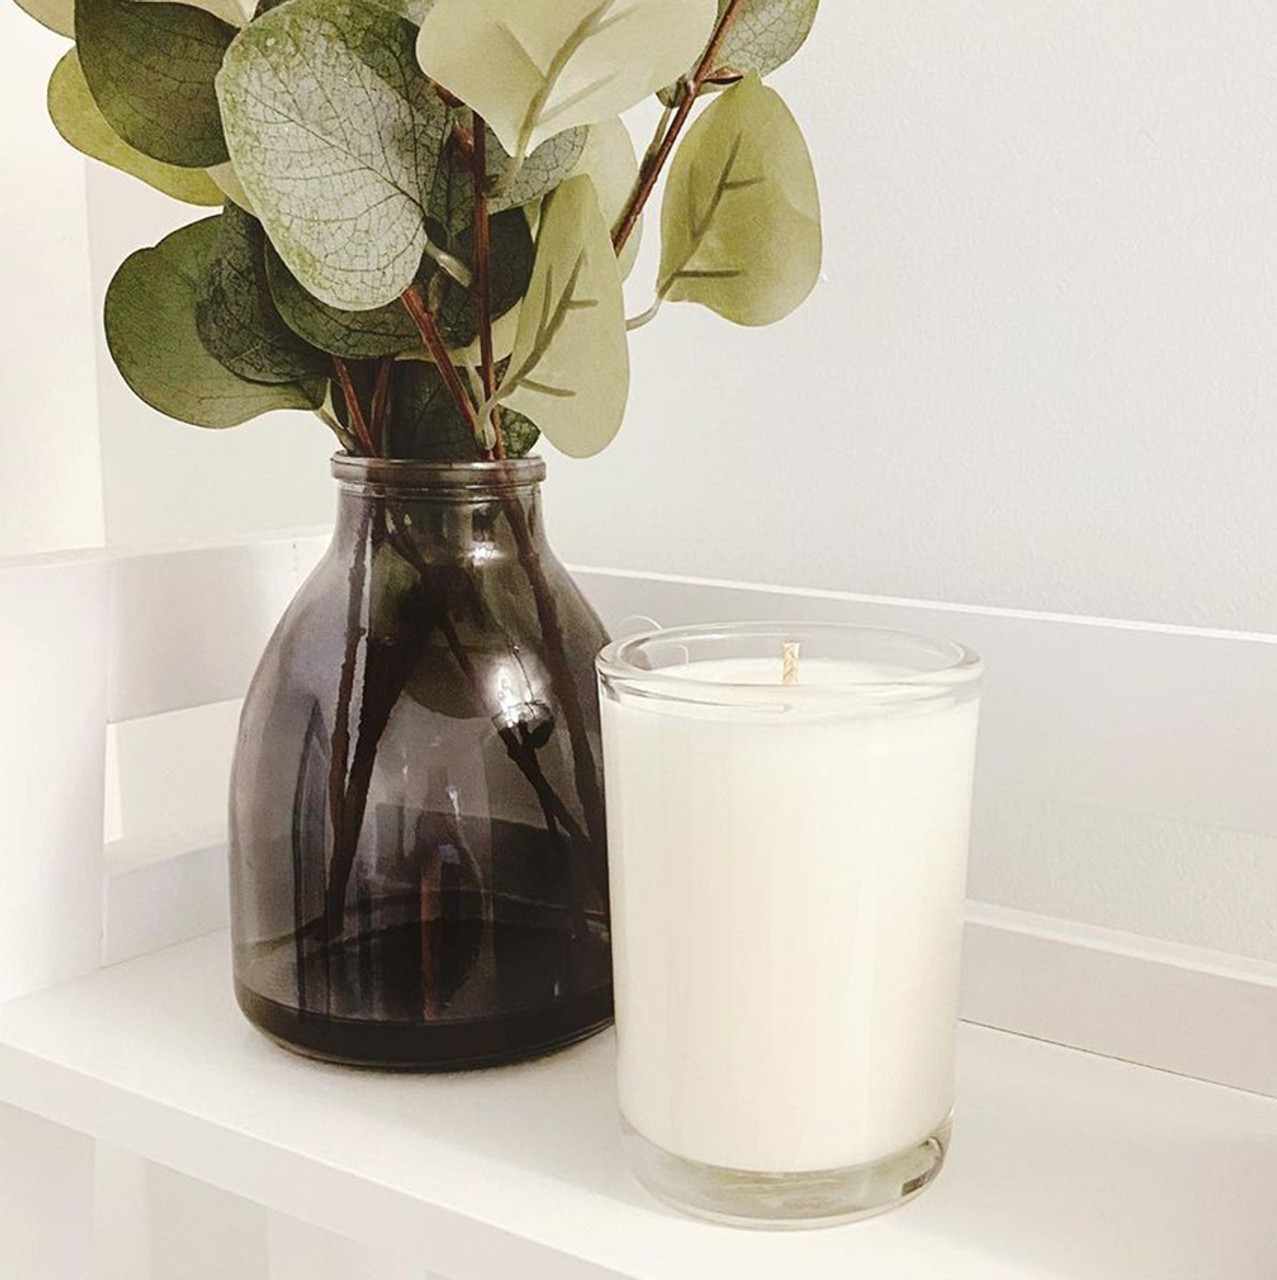 How to Make Soy Wax Candle With Essential Oils